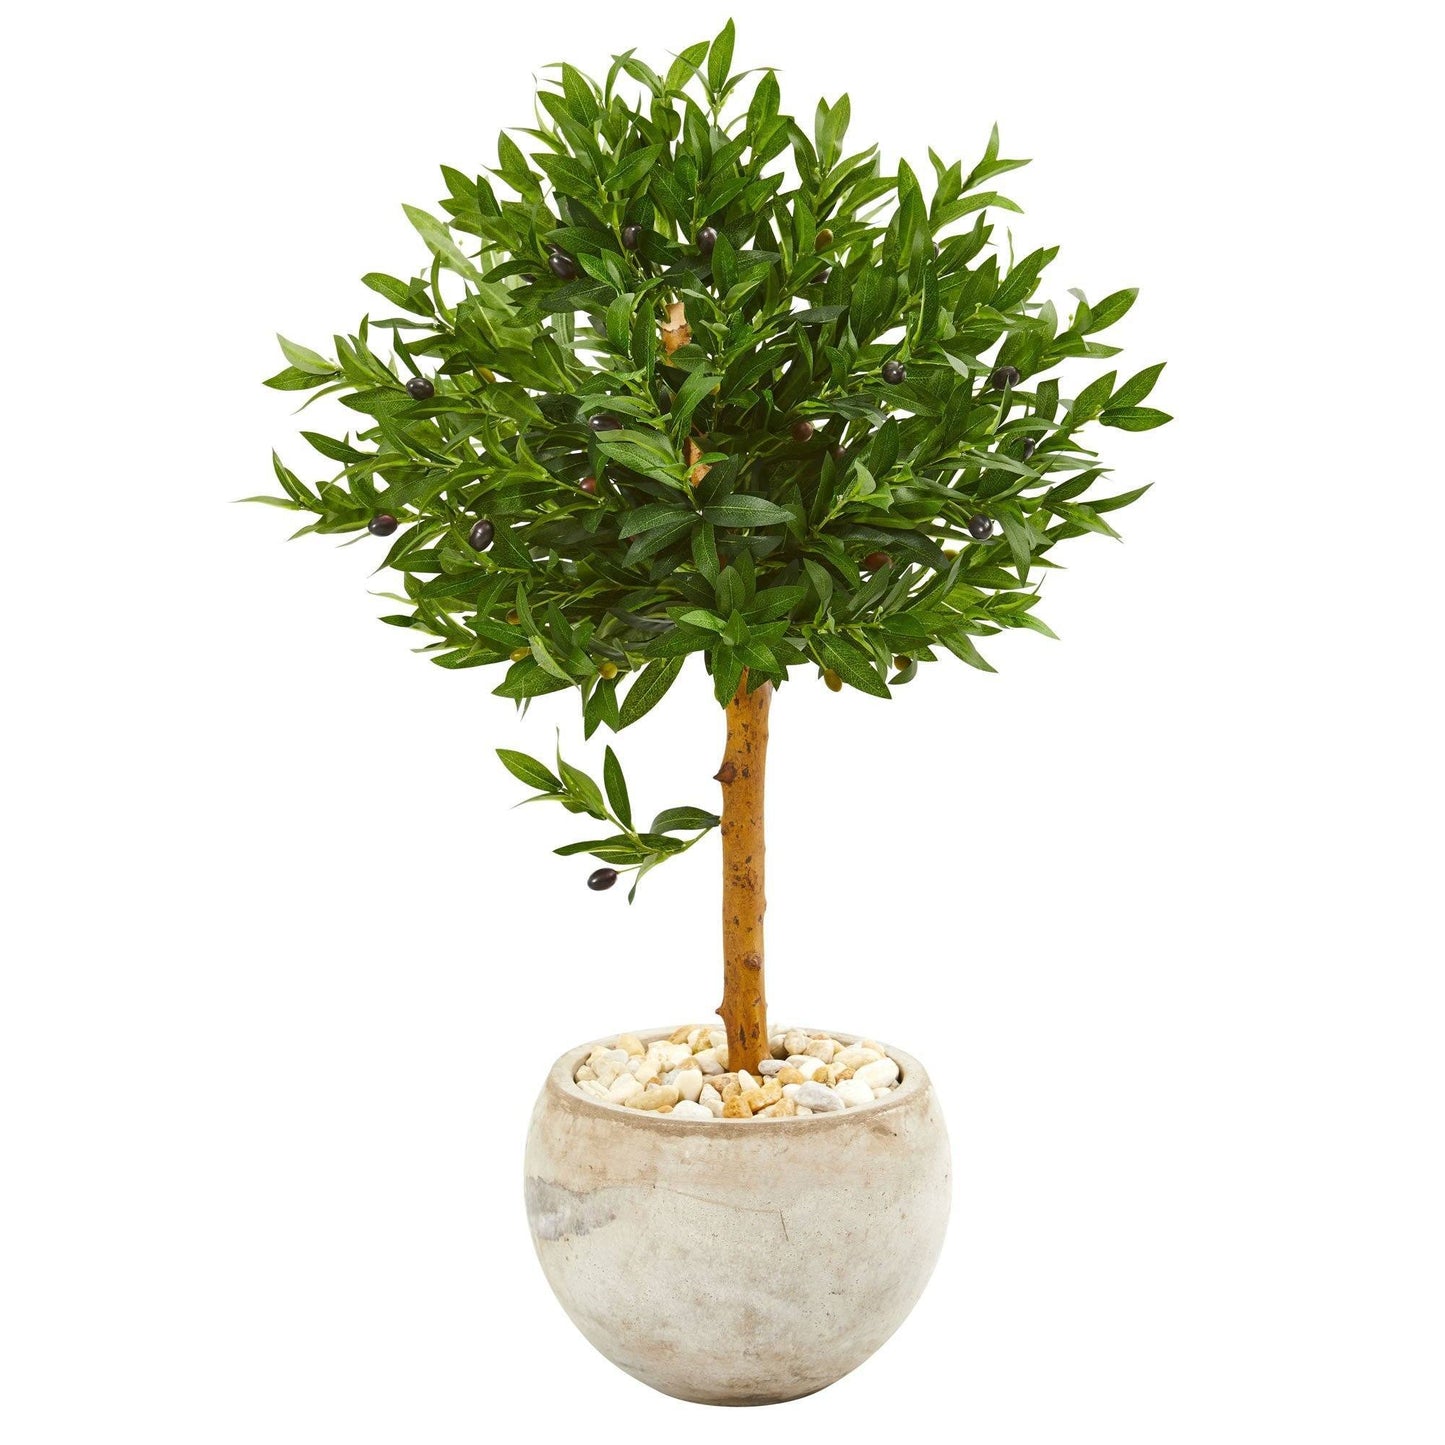 38” Olive Topiary Artificial Tree in Bowl Planter(Indoor/Outdoor) by Nearly Natural